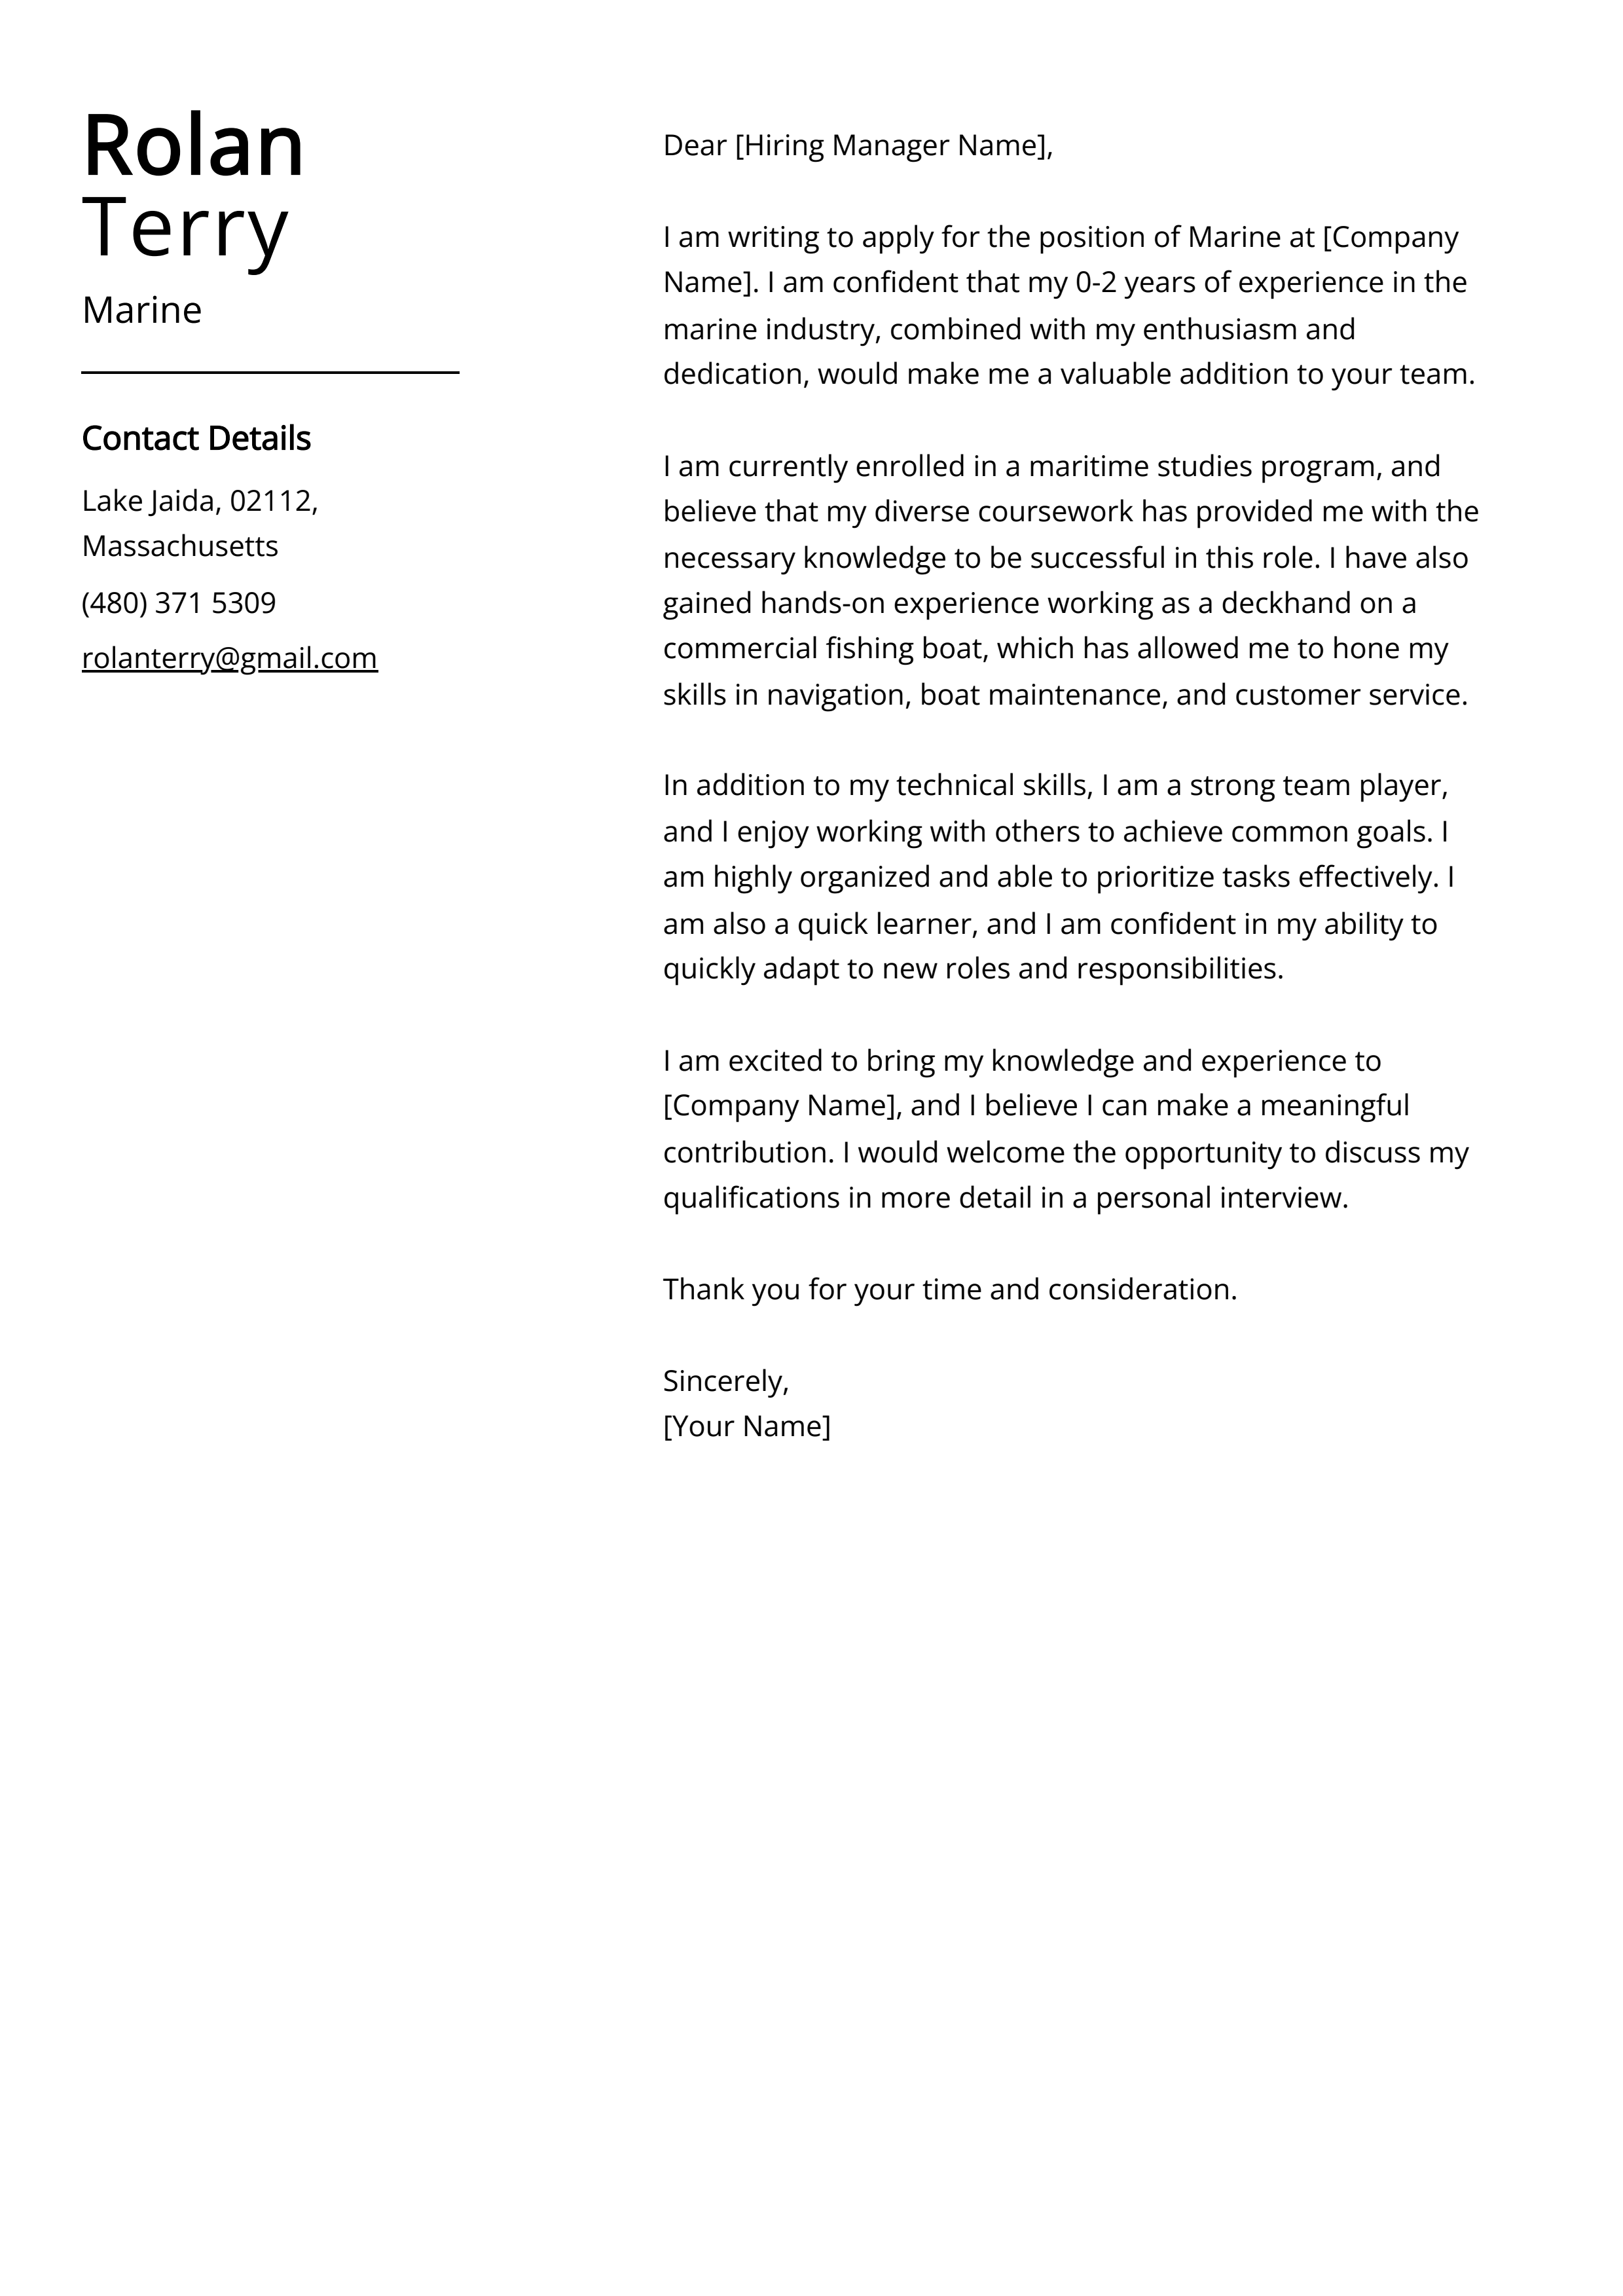 Marine Cover Letter Example